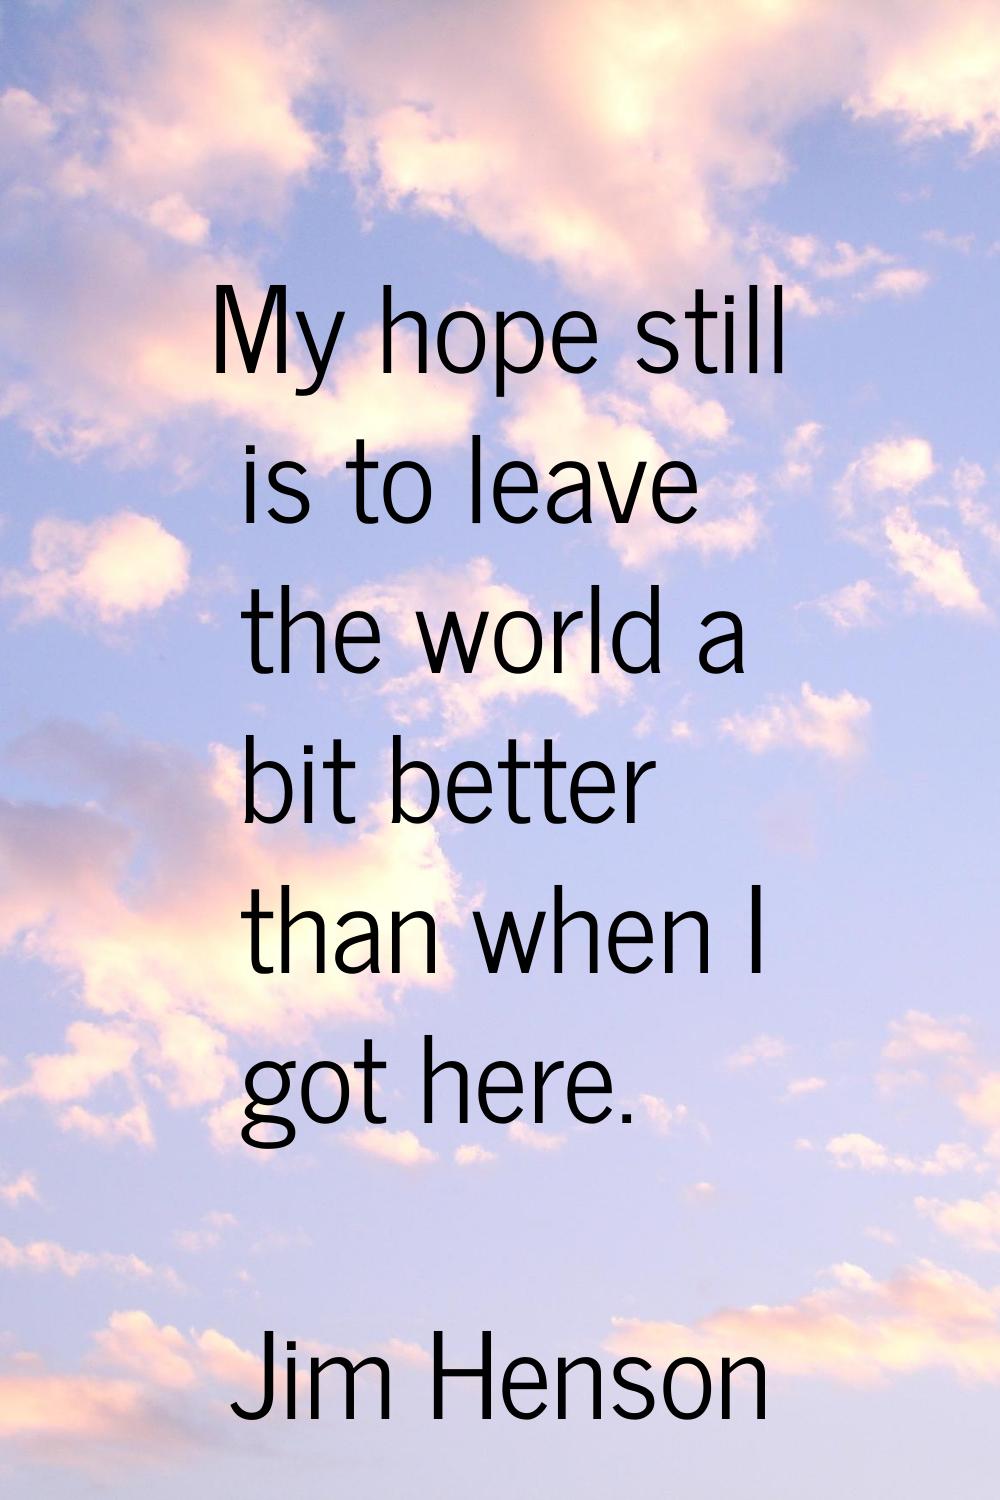 My hope still is to leave the world a bit better than when I got here.